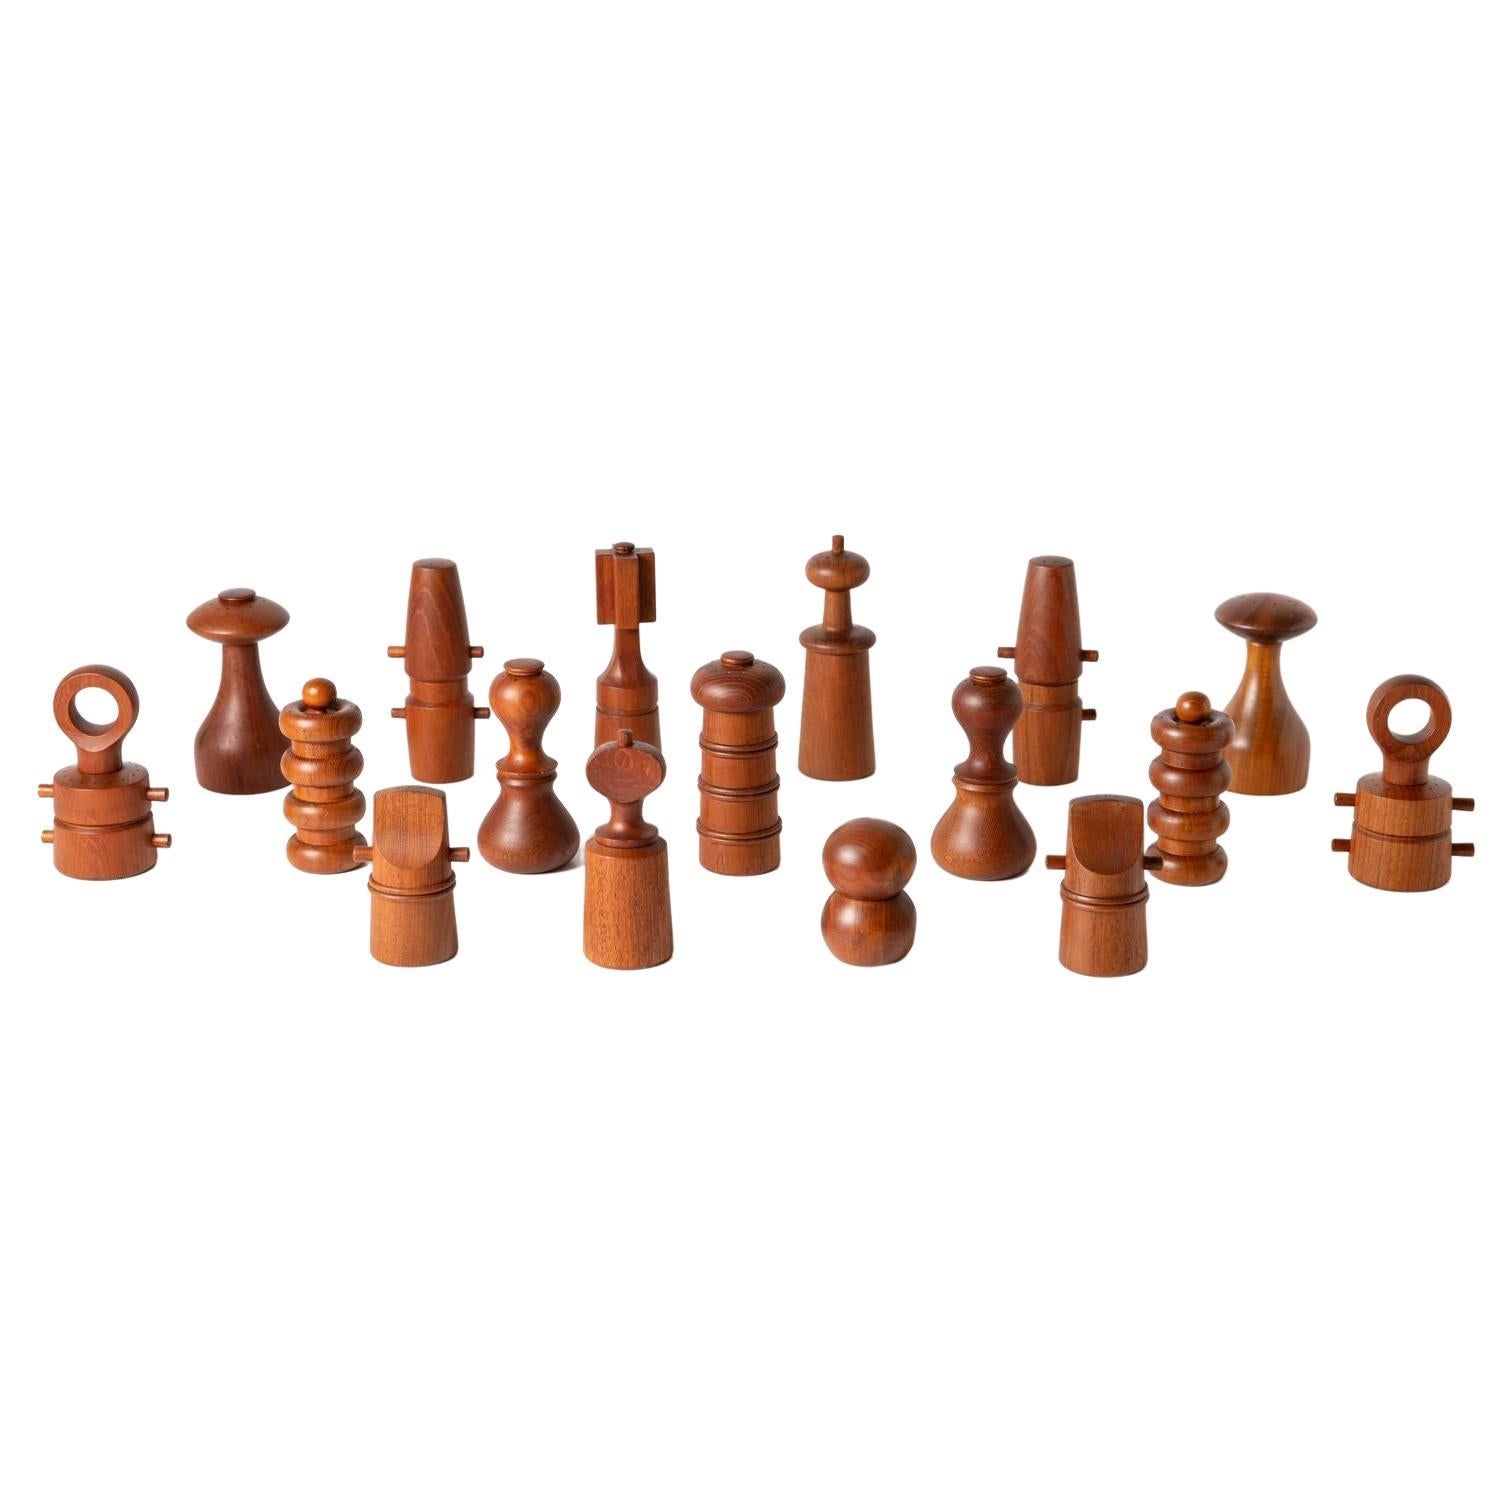 Dansk Pepper Mills by Jens Quistgaard - A Curated Collection of 17 For Sale